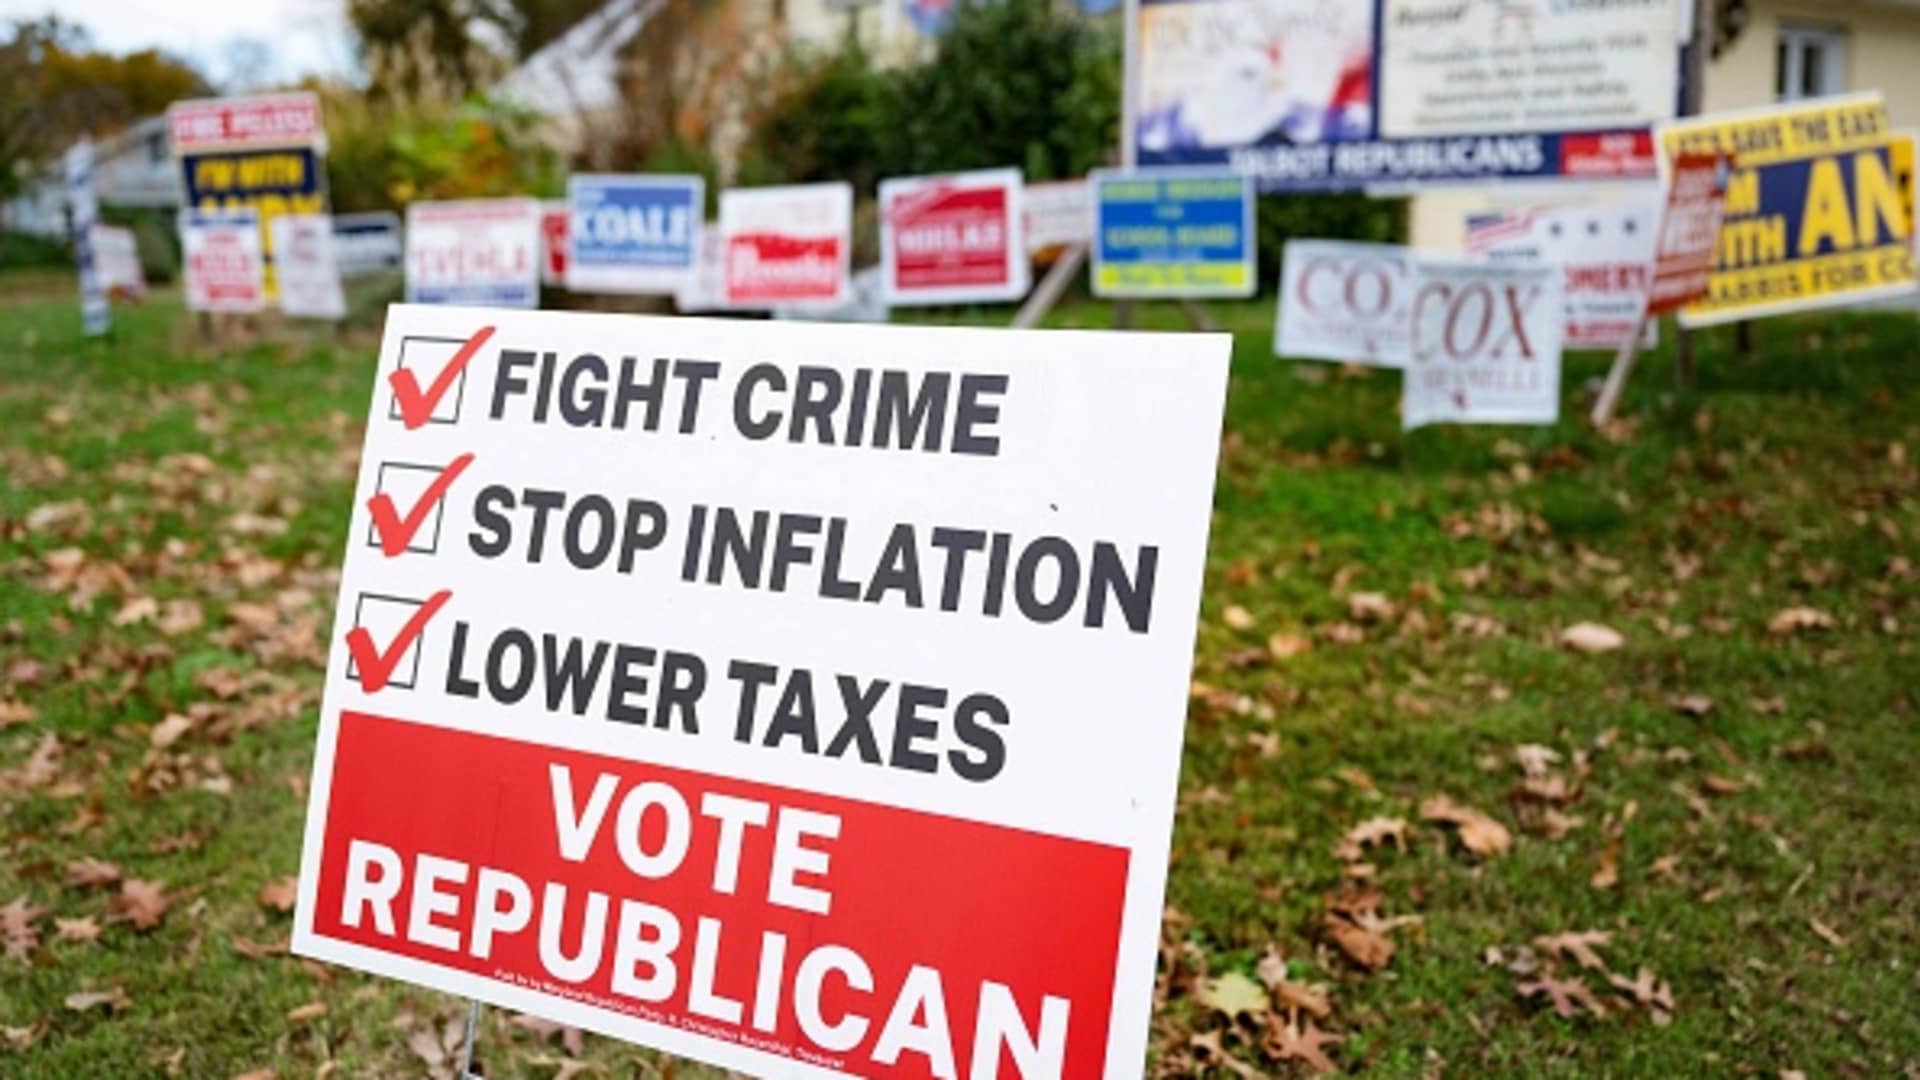 Election placards stand in the grass outside of the Talbot County Republican Central Committee in Easton, Maryland, on November 7, 2022.